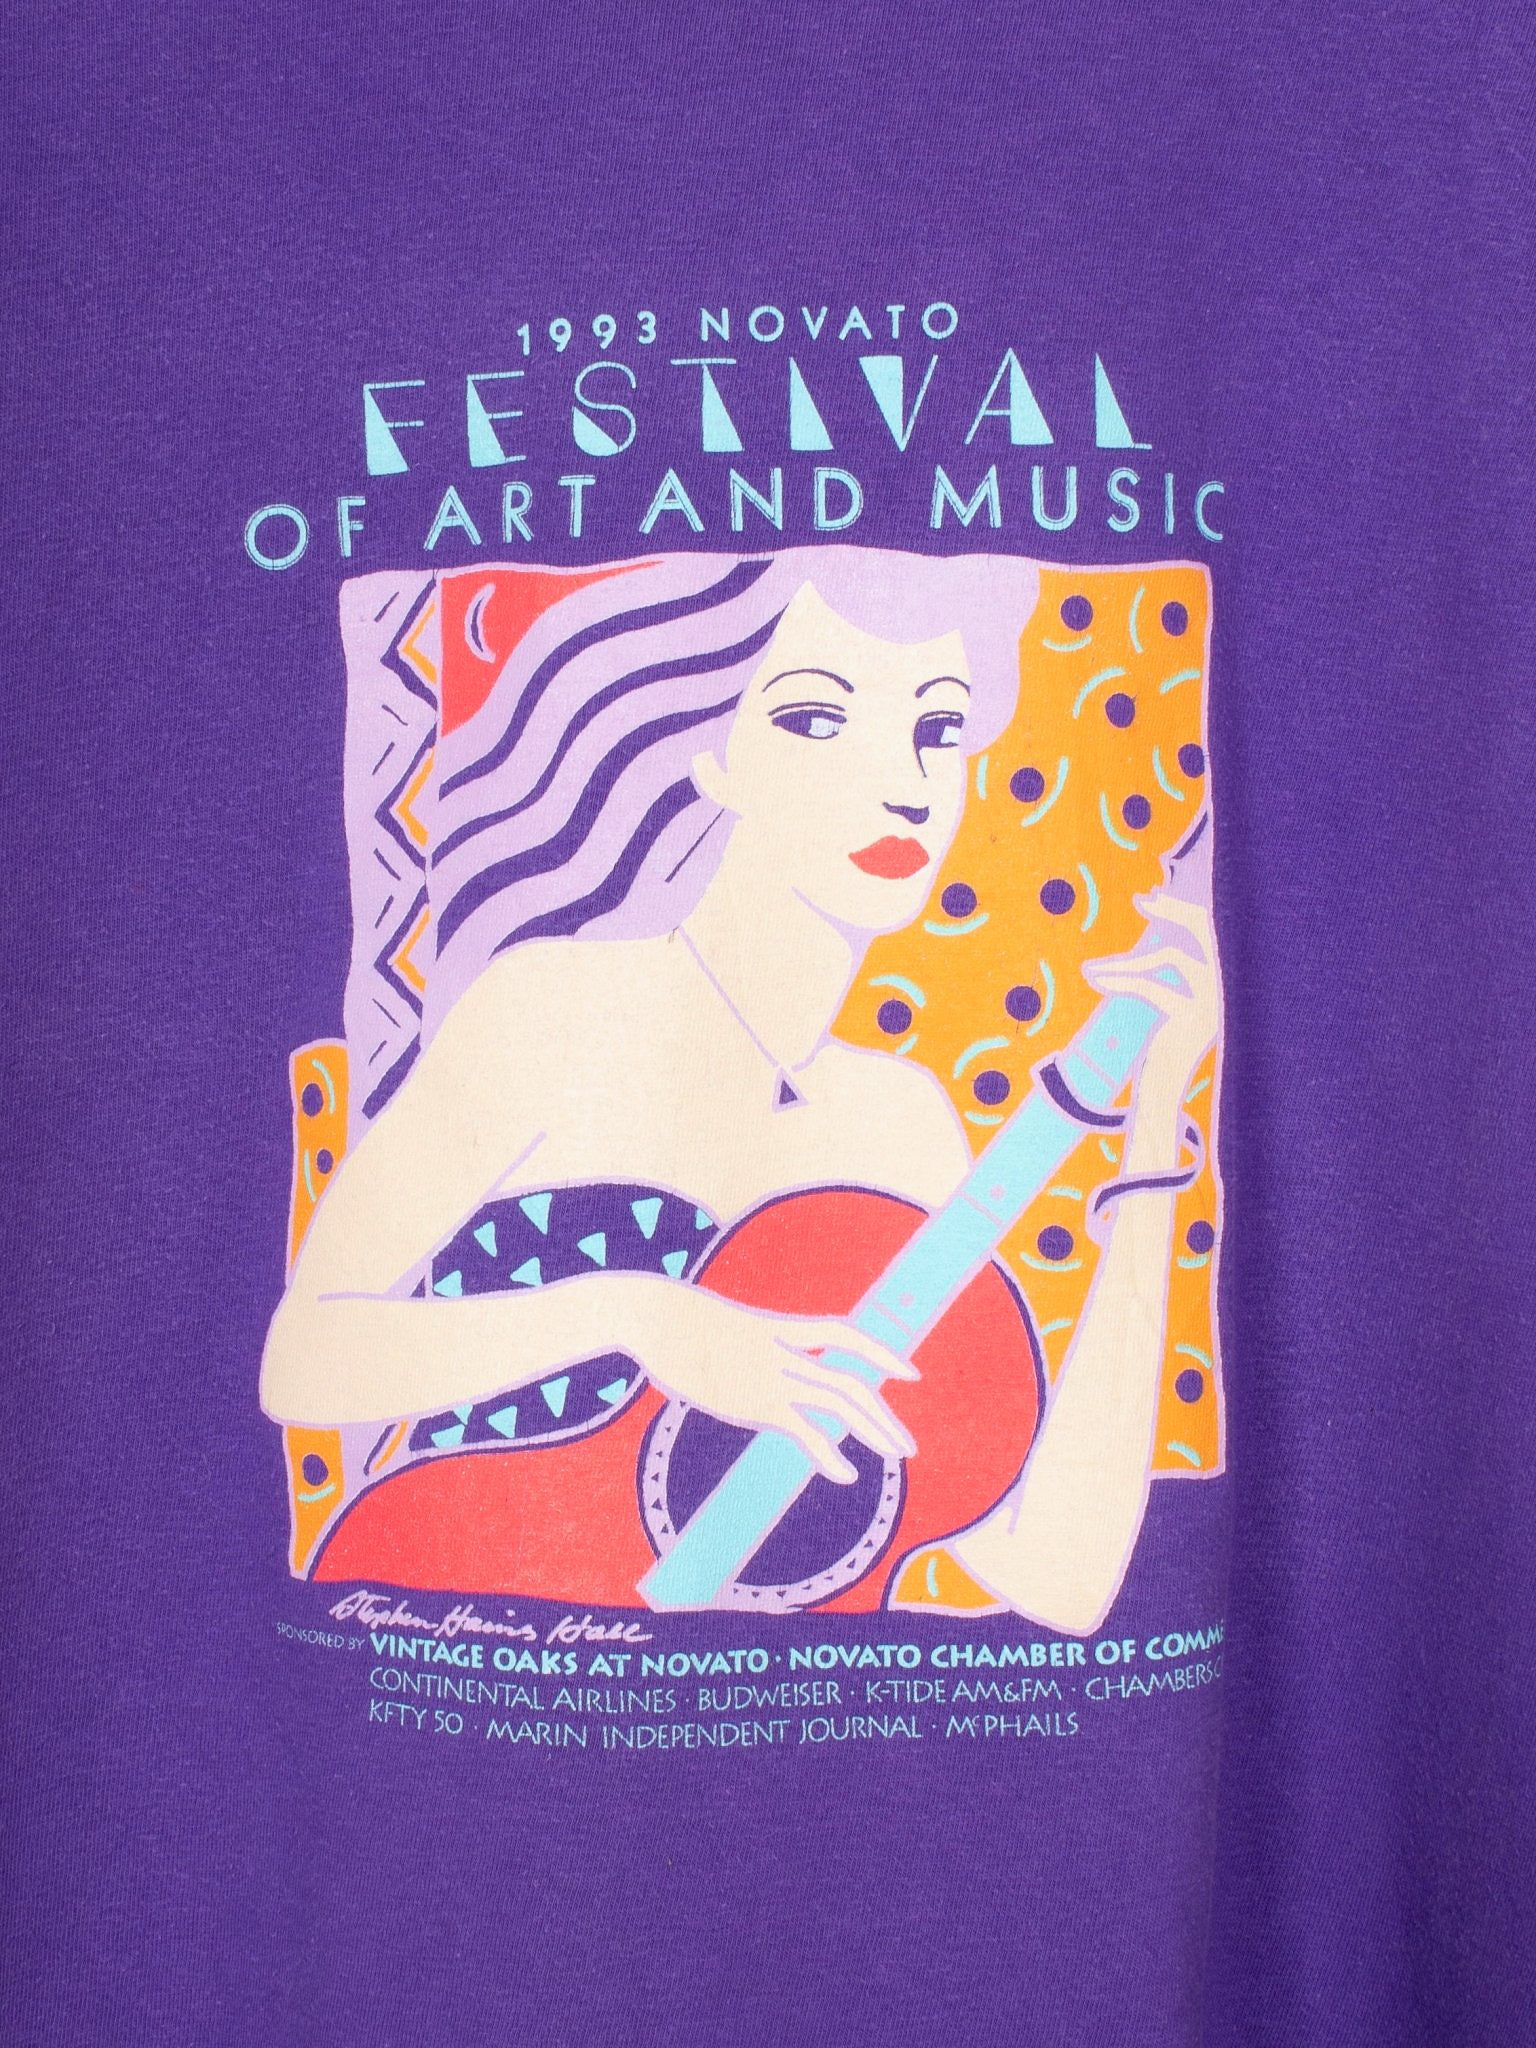 vintage 1990s Single Stitch "1993 Festival of Art and Music" Tee